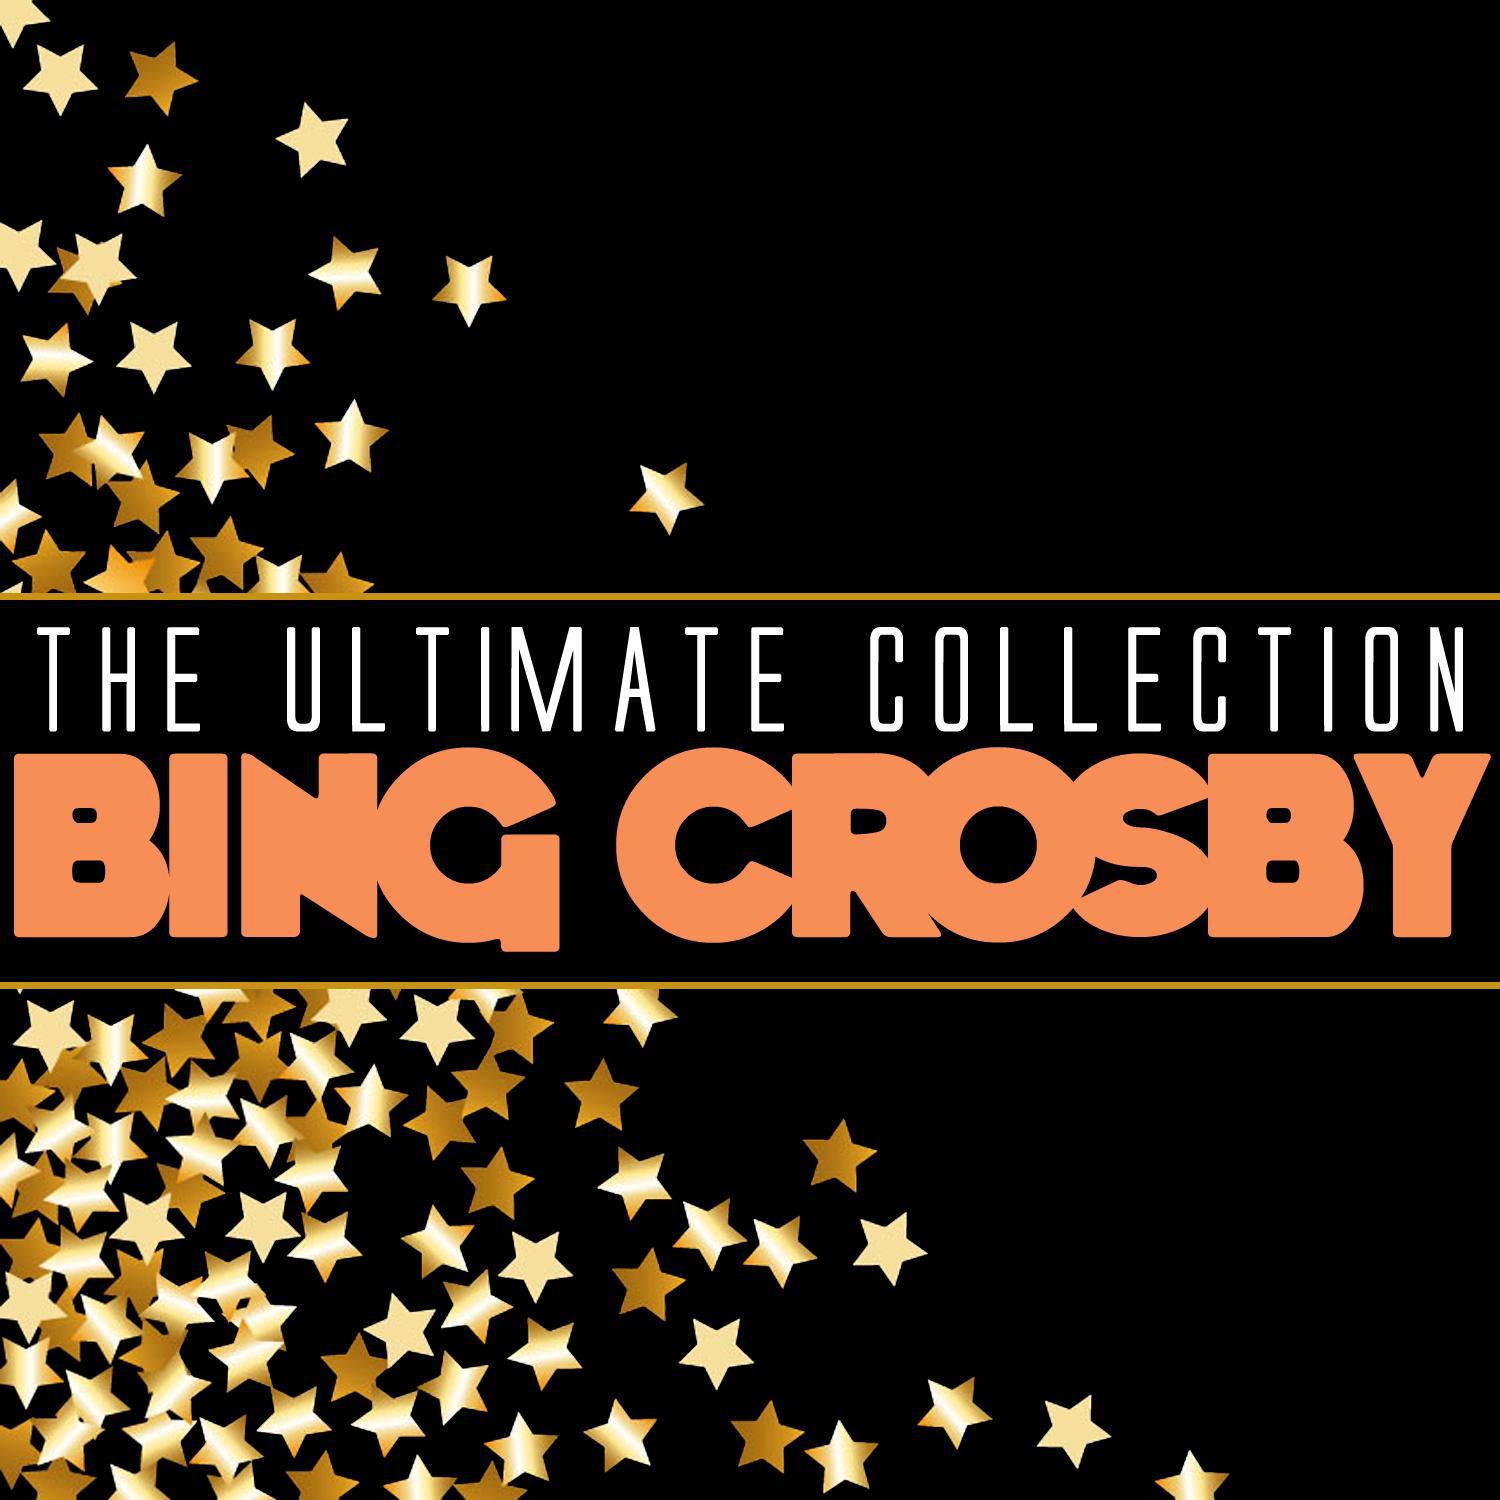 The Ultimate Collection: Bing Crosby